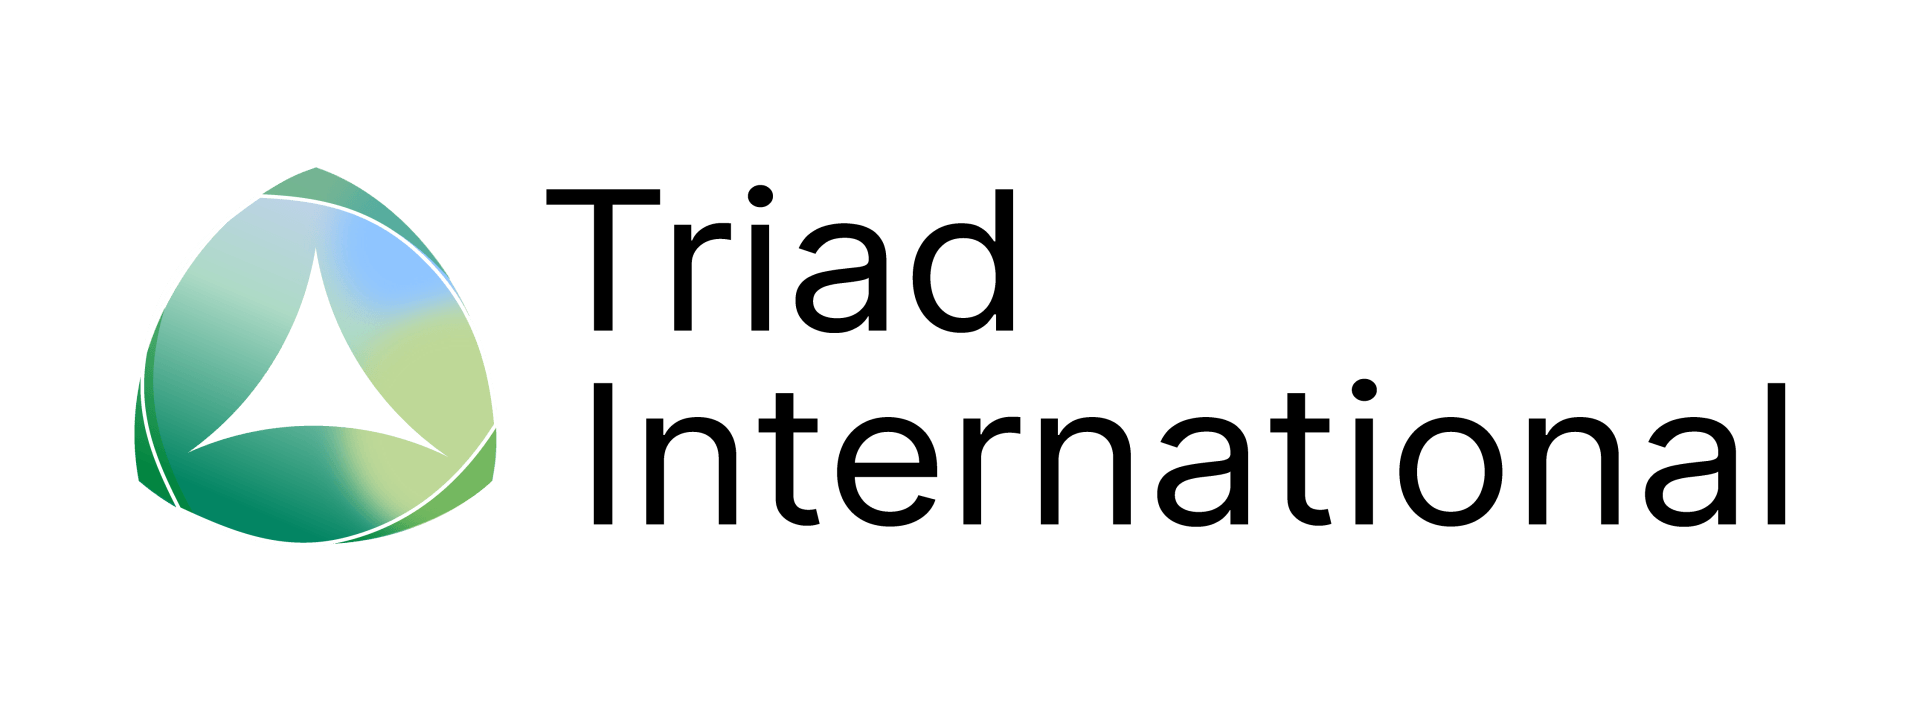 A triad international logo with a green triangle on a white background.